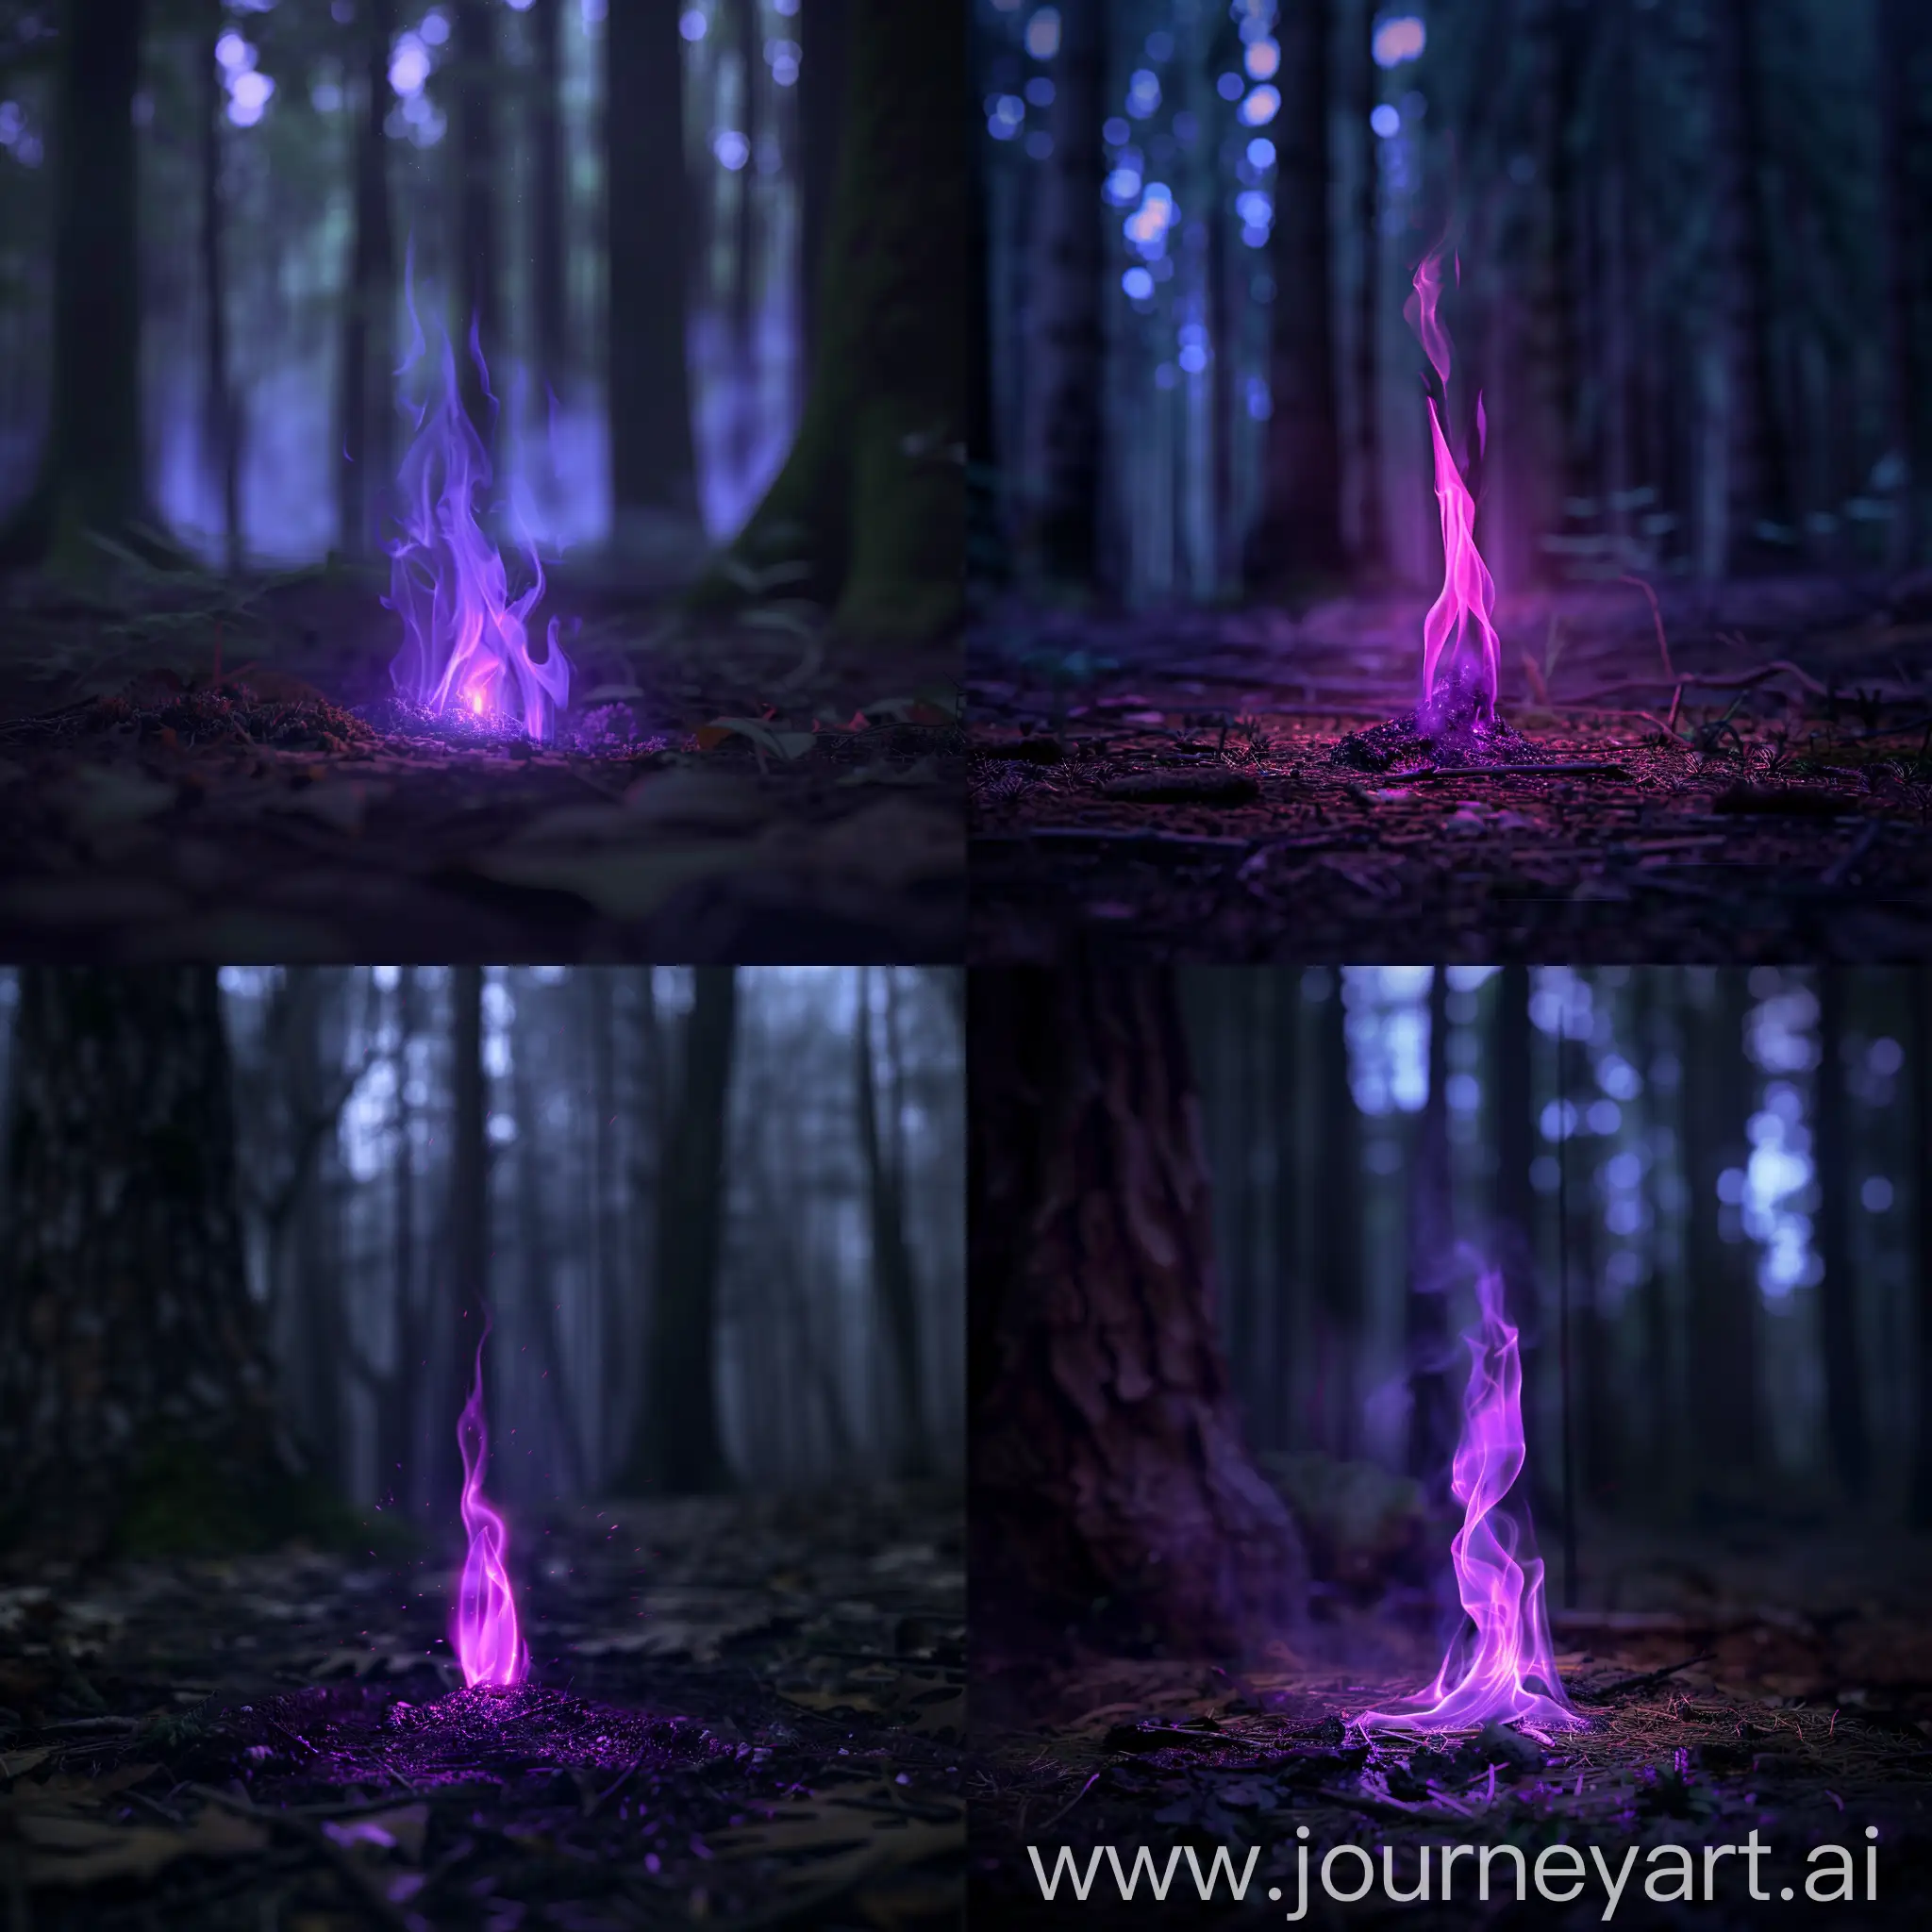 Violet flame in the dark forest, ultra realistic, hyper detailed. use sony a7 II camera with an 30mm lens fat F.1.2 aperture setting to blur the background and isolate the subject. use distinctive lighting on the subjects shot. The image should be shot in ultra-high resolution. --v 6